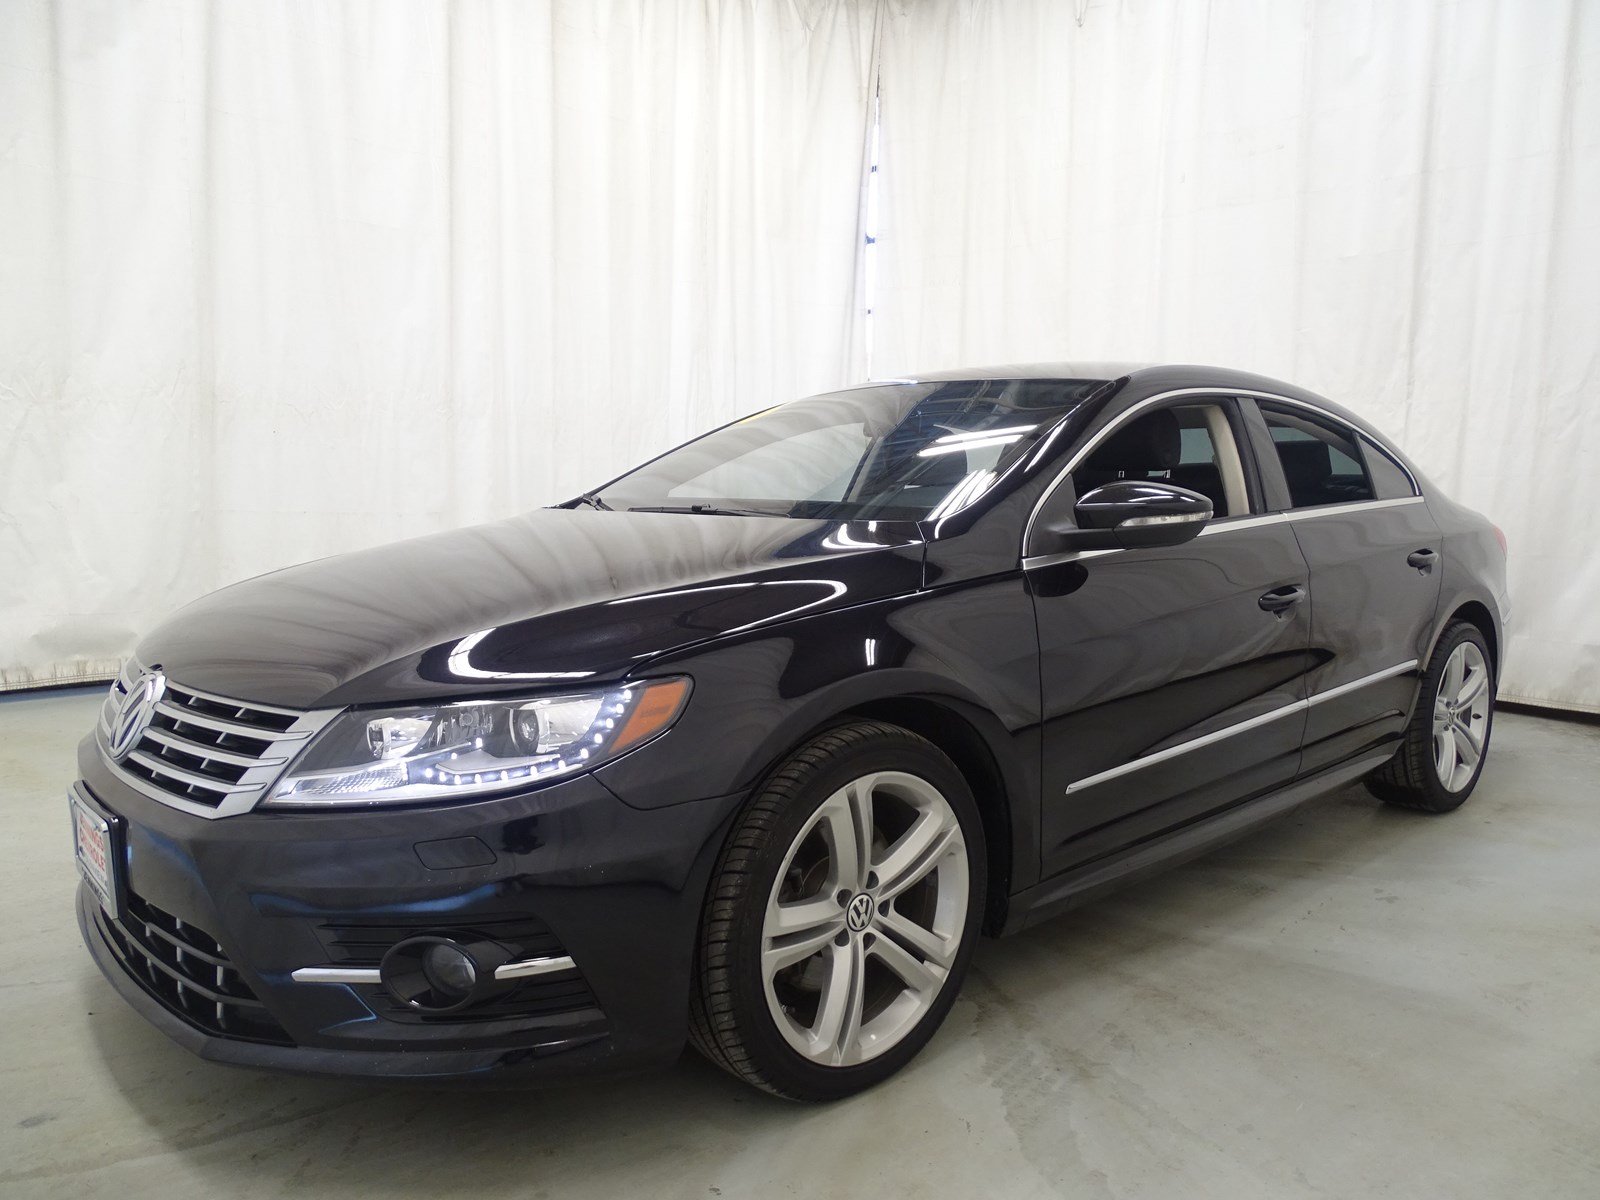 PreOwned 2016 Volkswagen CC RLine FWD 4dr Car